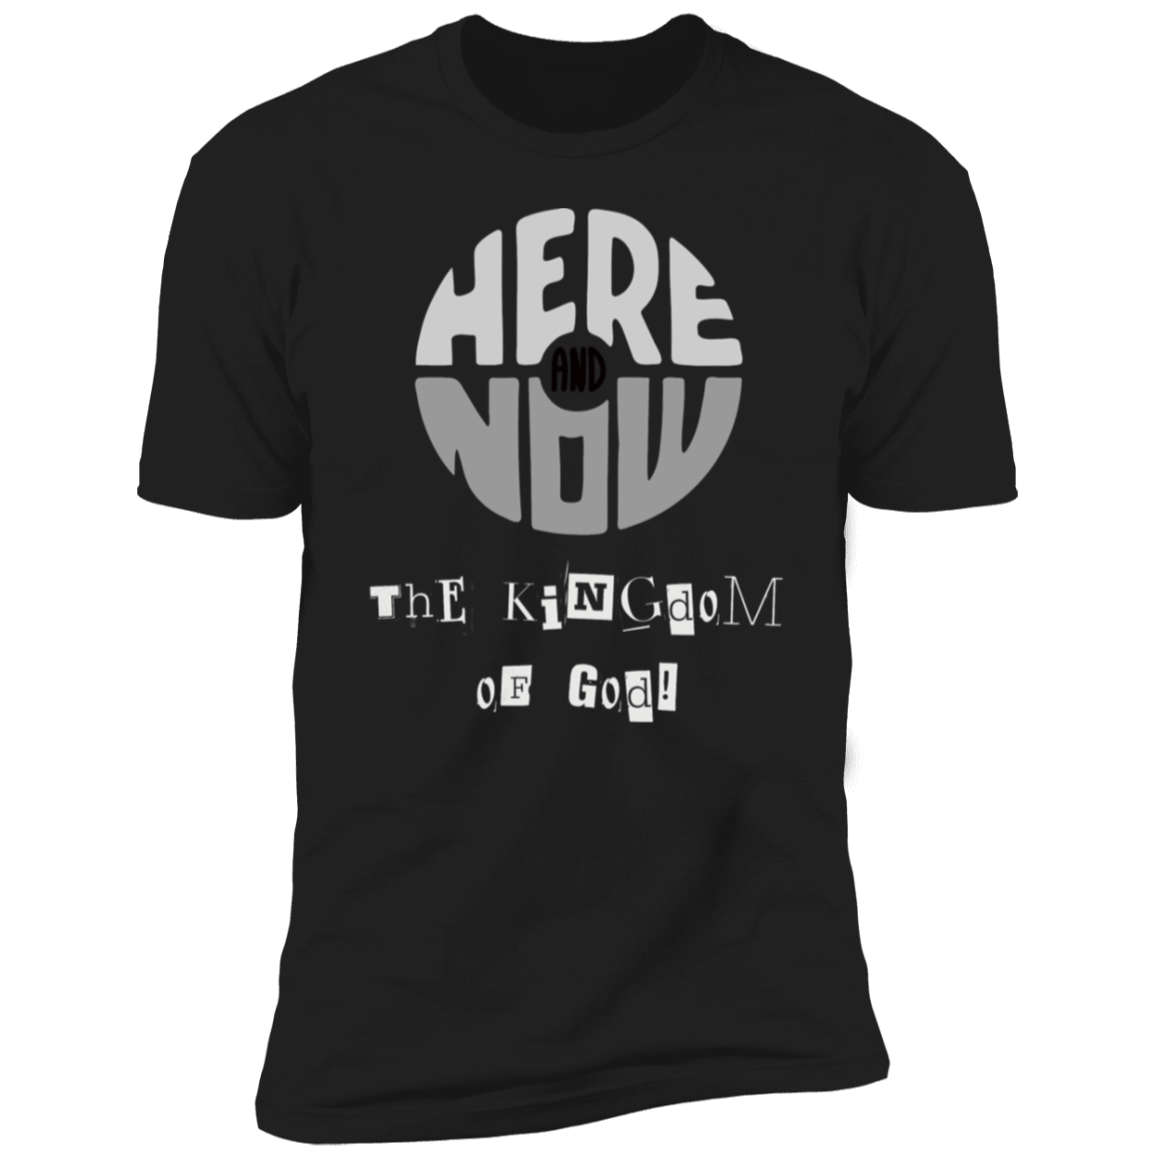 Here Now the Kingdom of God Bible - Tee Premium Short Sleeve